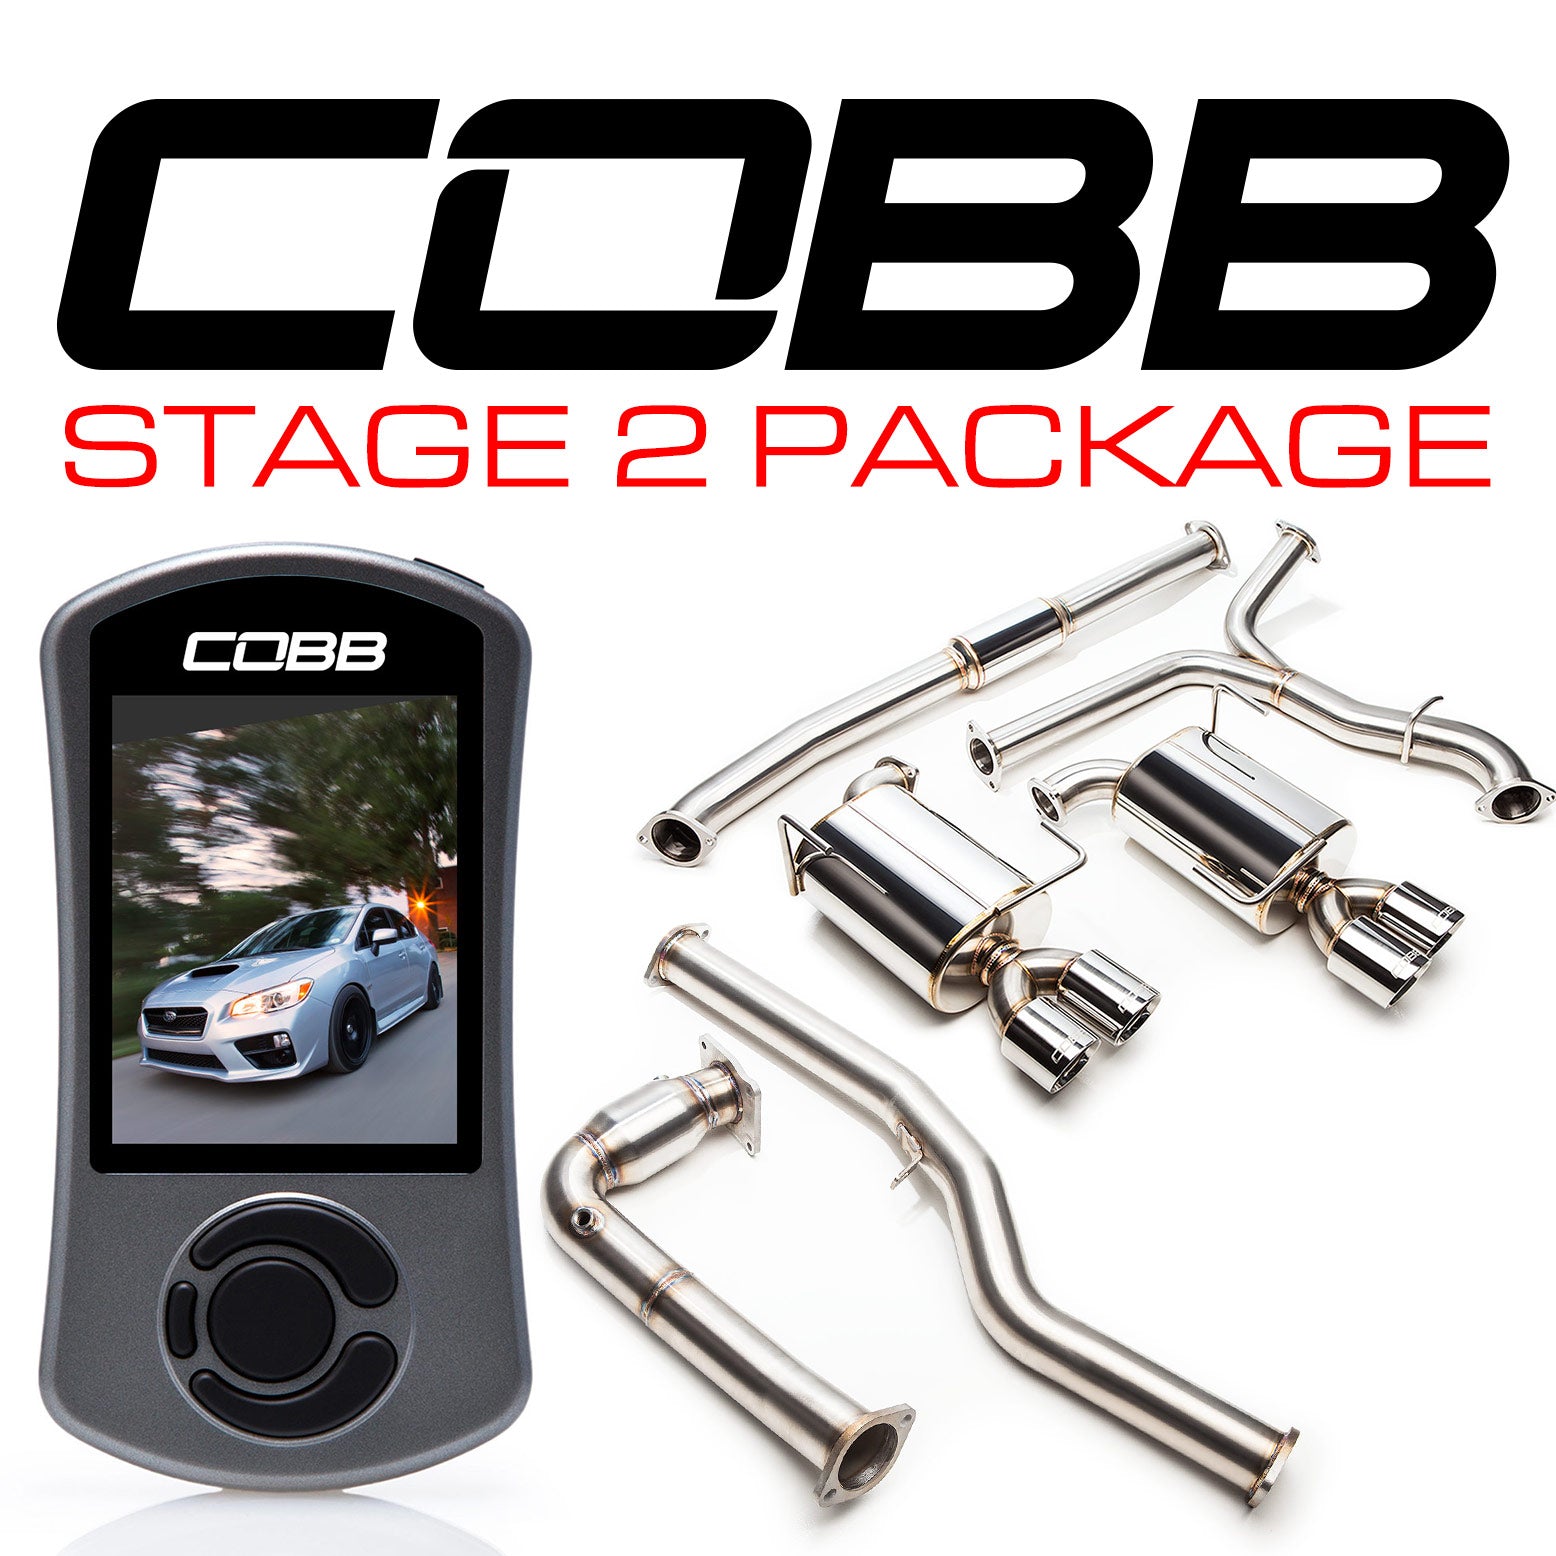 SUBARU STAGE 2 POWER PACKAGE (NON-RESONATED J-PIPE) WRX 6MT 2015-2020